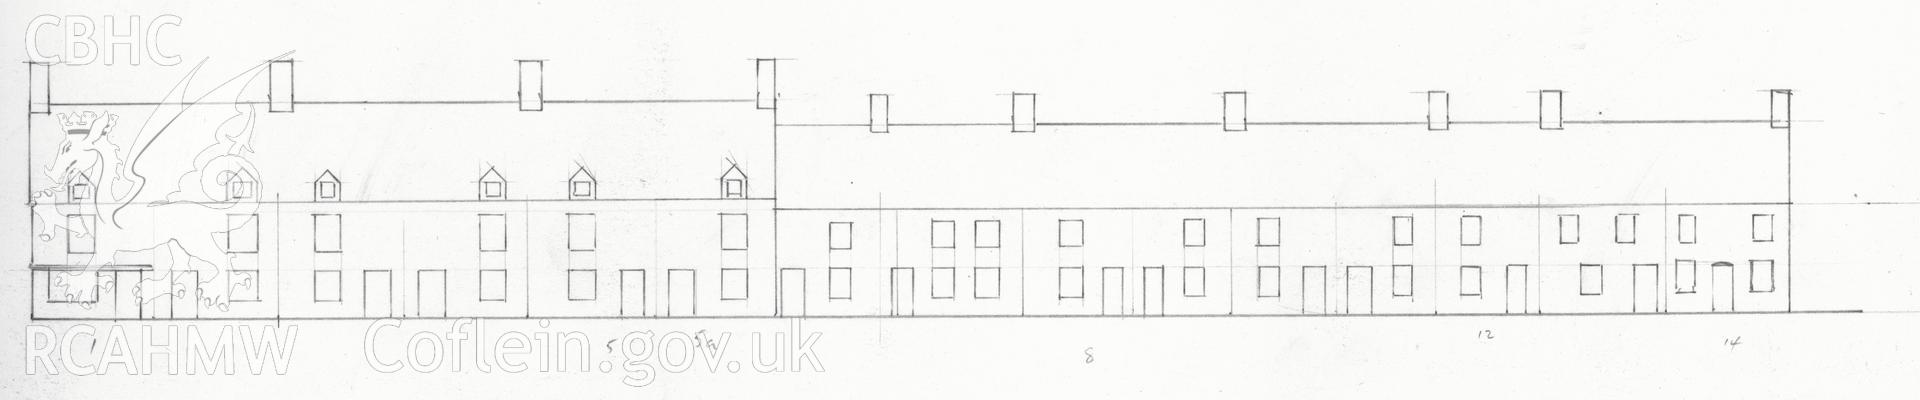 Digital copy of a sketch showing houses on Tramroad Side, Georgetown, 1977 by A.J.Parkinson.